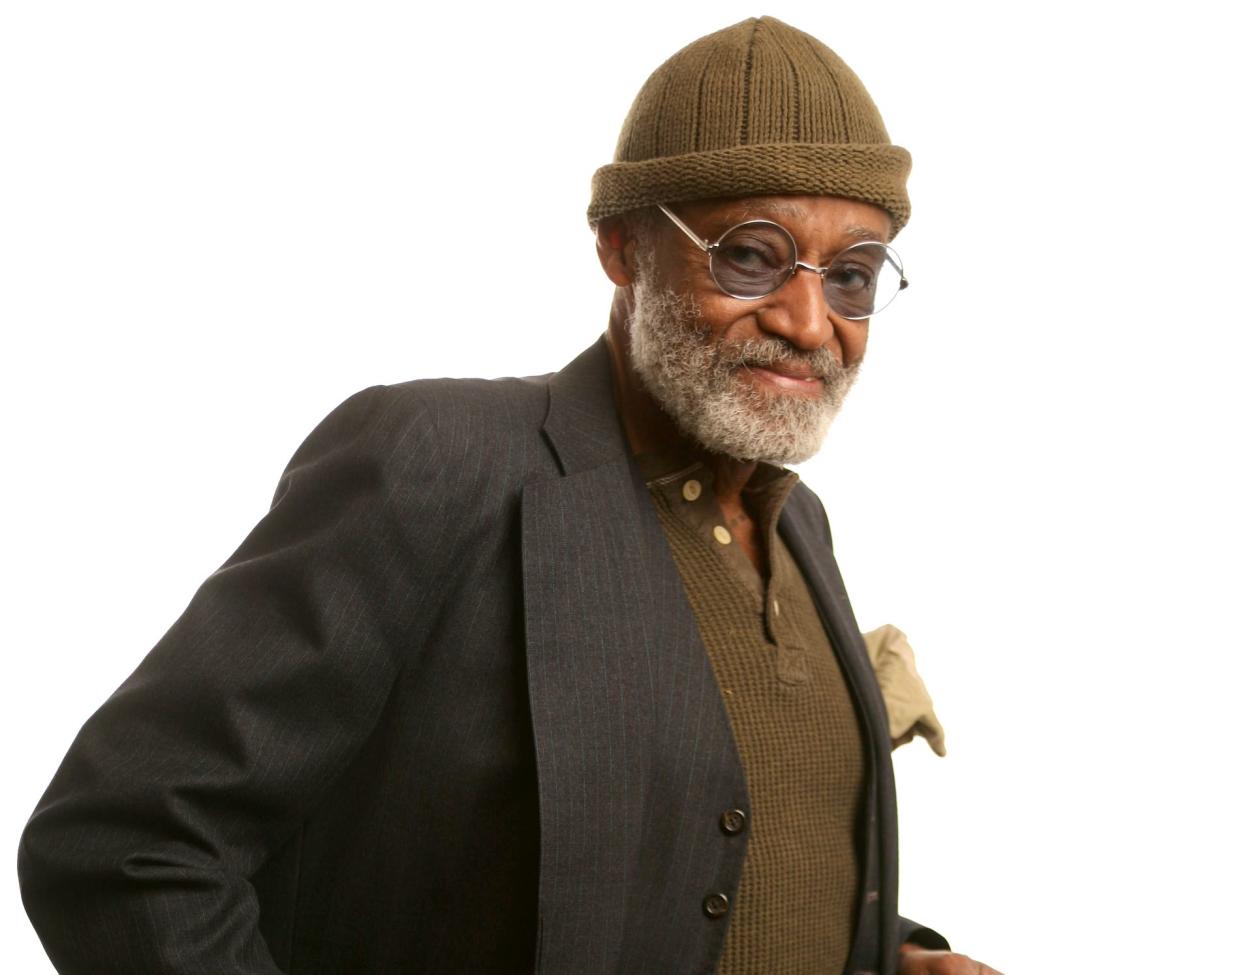 Actor/director/writer Melvin Van Peebles poses for a portrait during the Tribeca Film Festival on April 29, 2008 in New York City. 